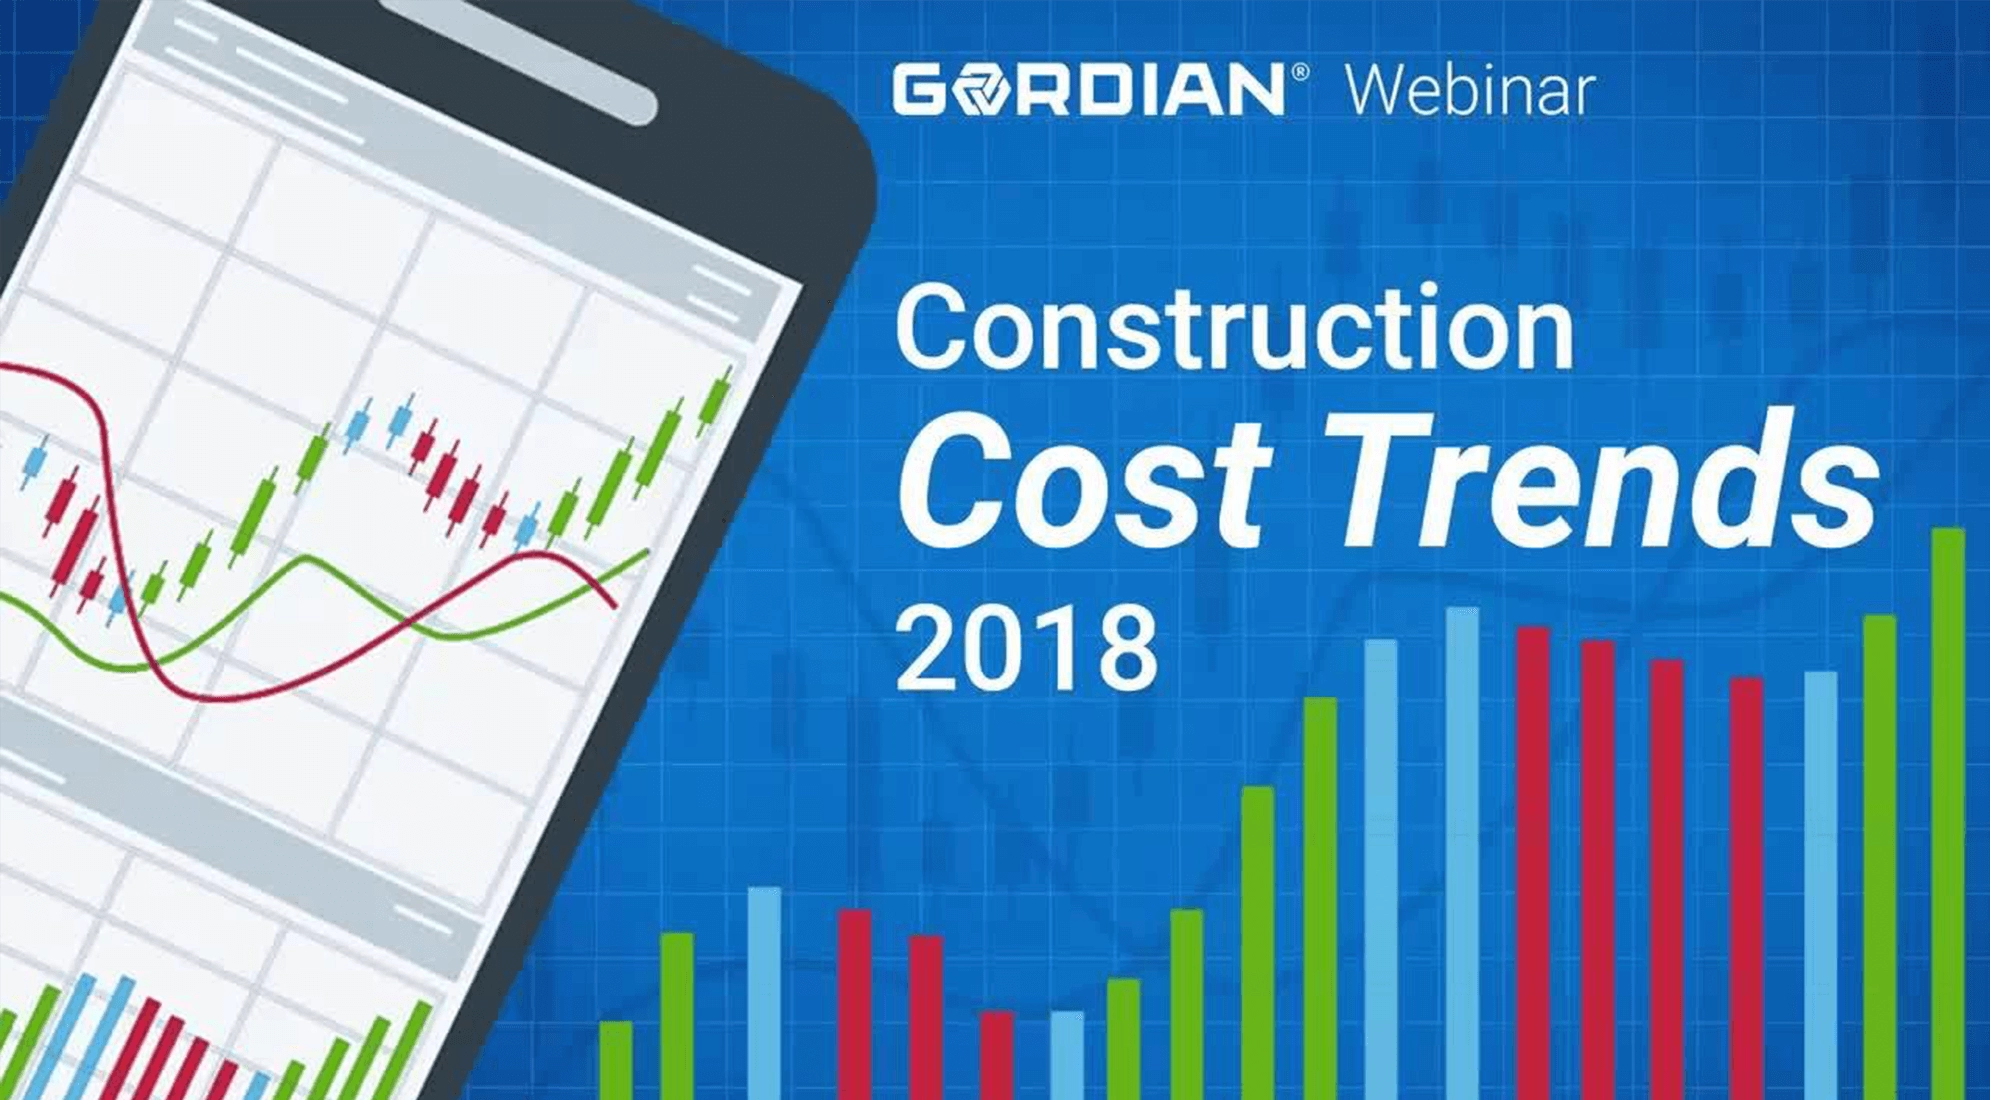 Construction Cost Trends 2018